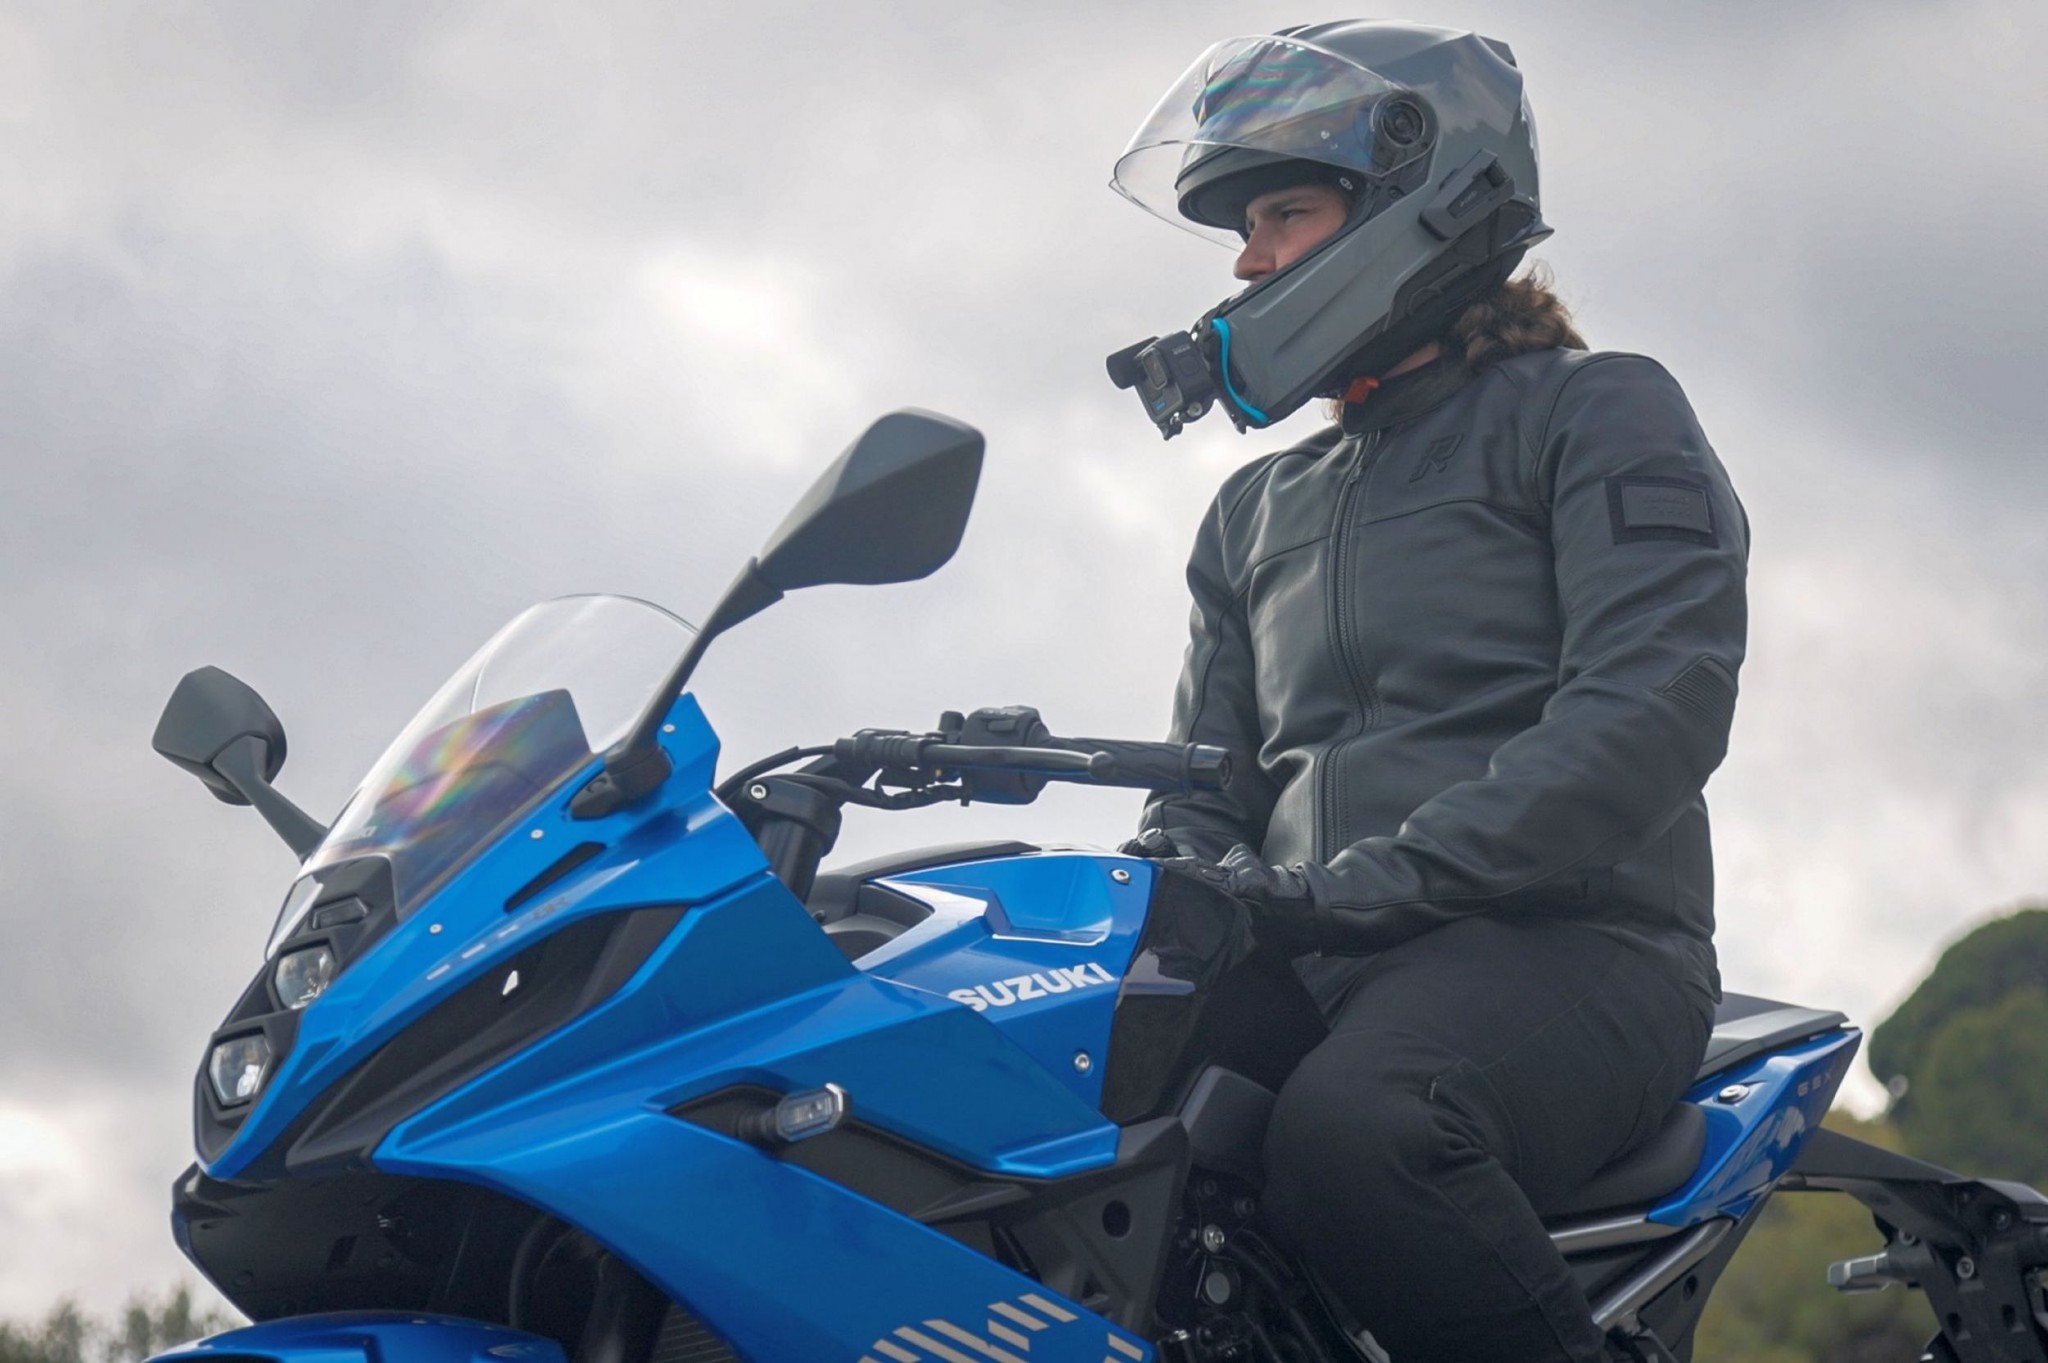 Schuberth S3 sport touring helmet in the test - Image 24